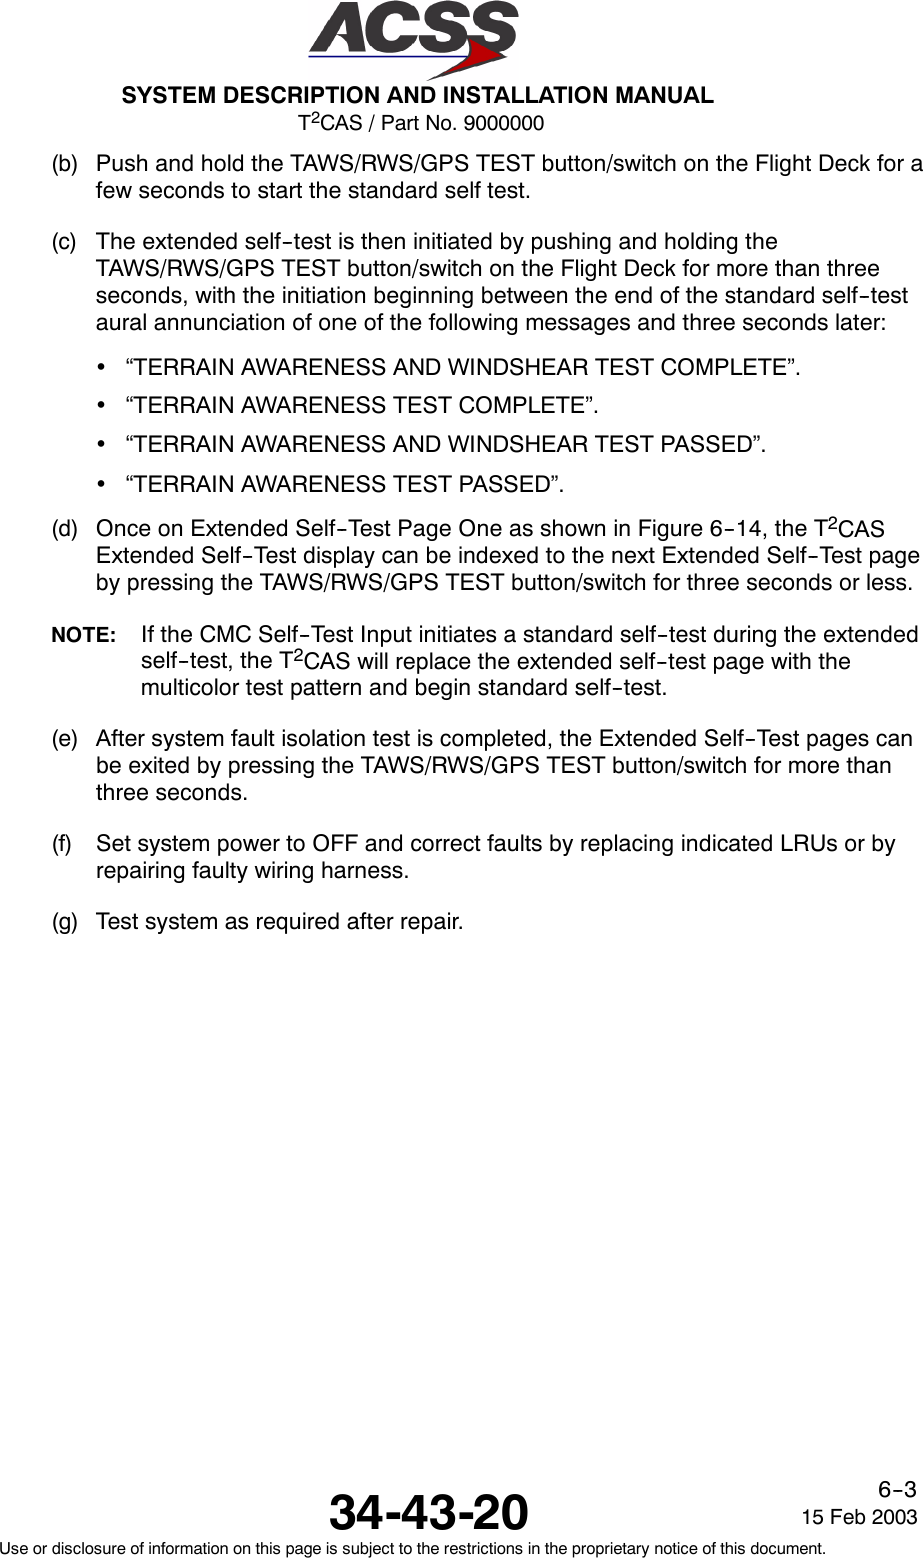 T2CAS / Part No. 9000000SYSTEM DESCRIPTION AND INSTALLATION MANUAL34-43-20 15 Feb 2003Use or disclosure of information on this page is subject to the restrictions in the proprietary notice of this document.6--3(b) Push and hold the TAWS/RWS/GPS TEST button/switch on the Flight Deck for afew seconds to start the standard self test.(c) The extended self--test is then initiated by pushing and holding theTAWS/RWS/GPS TEST button/switch on the Flight Deck for more than threeseconds, with the initiation beginning between the end of the standard self--testaural annunciation of one of the following messages and three seconds later:•“TERRAIN AWARENESS AND WINDSHEAR TEST COMPLETE”.•“TERRAIN AWARENESS TEST COMPLETE”.•“TERRAIN AWARENESS AND WINDSHEAR TEST PASSED”.•“TERRAIN AWARENESS TEST PASSED”.(d) Once on Extended Self--Test Page One as shown in Figure 6--14, the T2CASExtended Self--Test display can be indexed to the next Extended Self--Test pageby pressing the TAWS/RWS/GPS TEST button/switch for three seconds or less.NOTE: If the CMC Self--Test Input initiates a standard self--test during the extendedself--test, the T2CAS will replace the extended self--test page with themulticolor test pattern and begin standard self--test.(e) After system fault isolation test is completed, the Extended Self--Test pages canbe exited by pressing the TAWS/RWS/GPS TEST button/switch for more thanthree seconds.(f) Set system power to OFF and correct faults by replacing indicated LRUs or byrepairing faulty wiring harness.(g) Test system as required after repair.